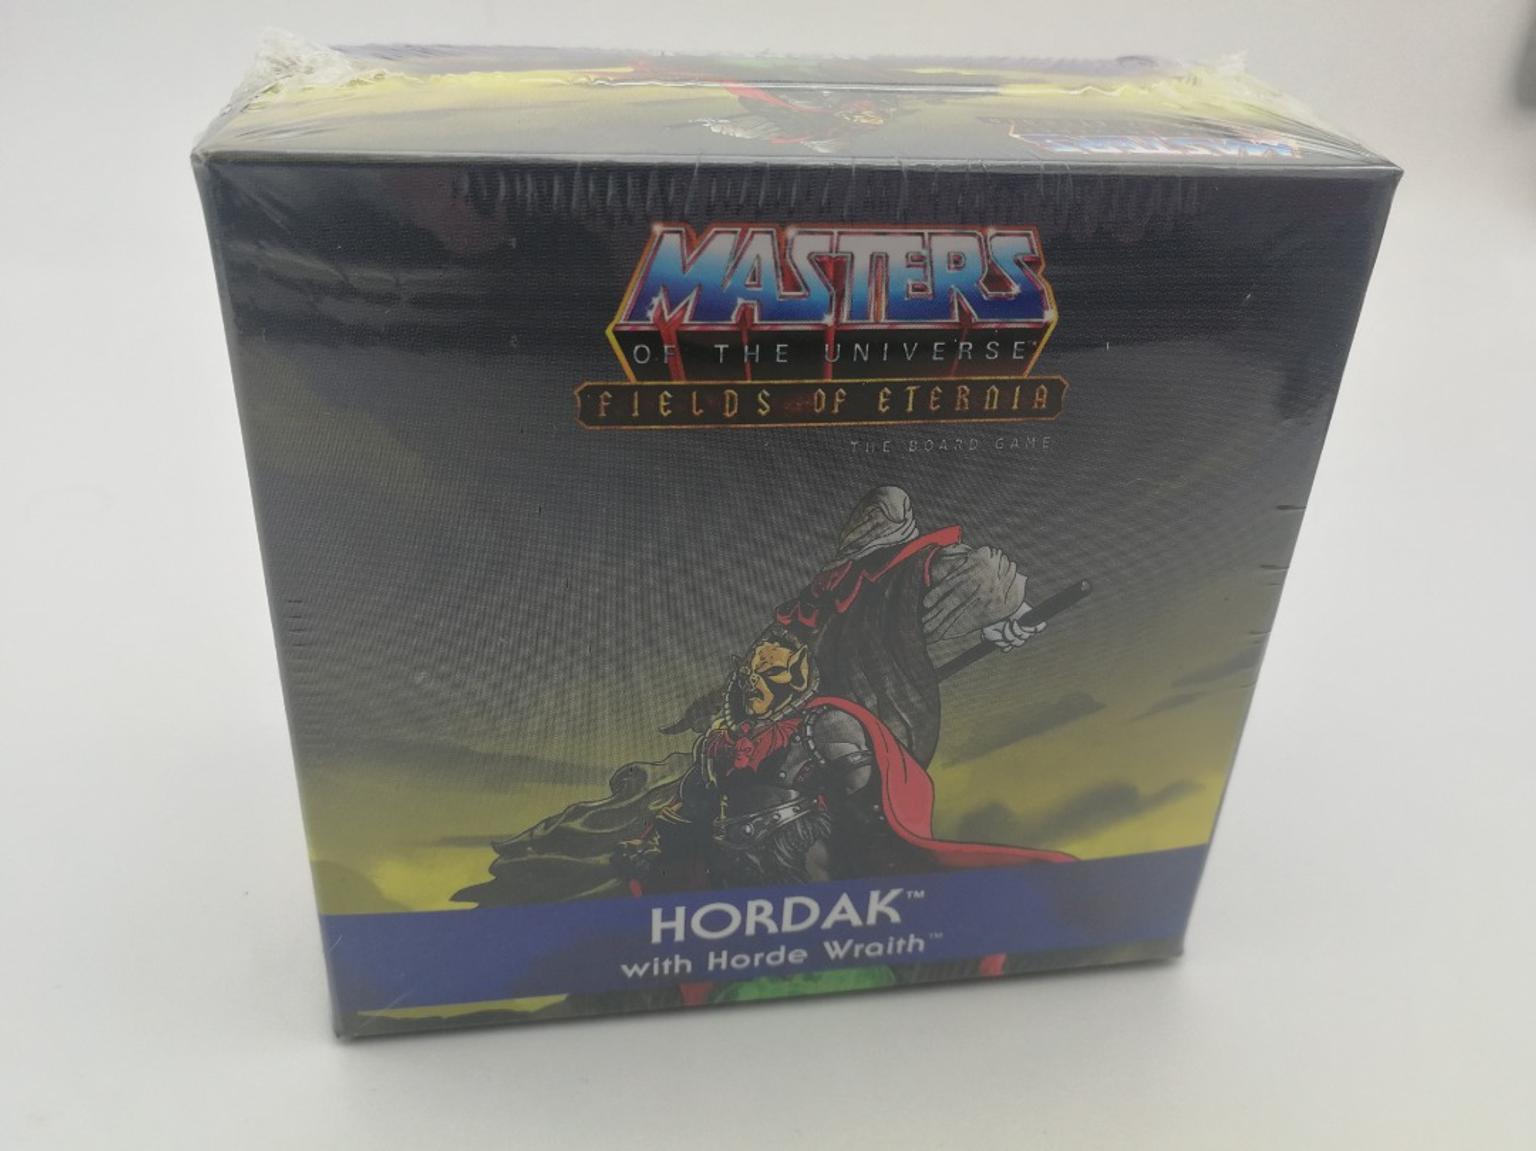 Masters of the Universe Fields of Eternia Hordak with Horde Wraith 